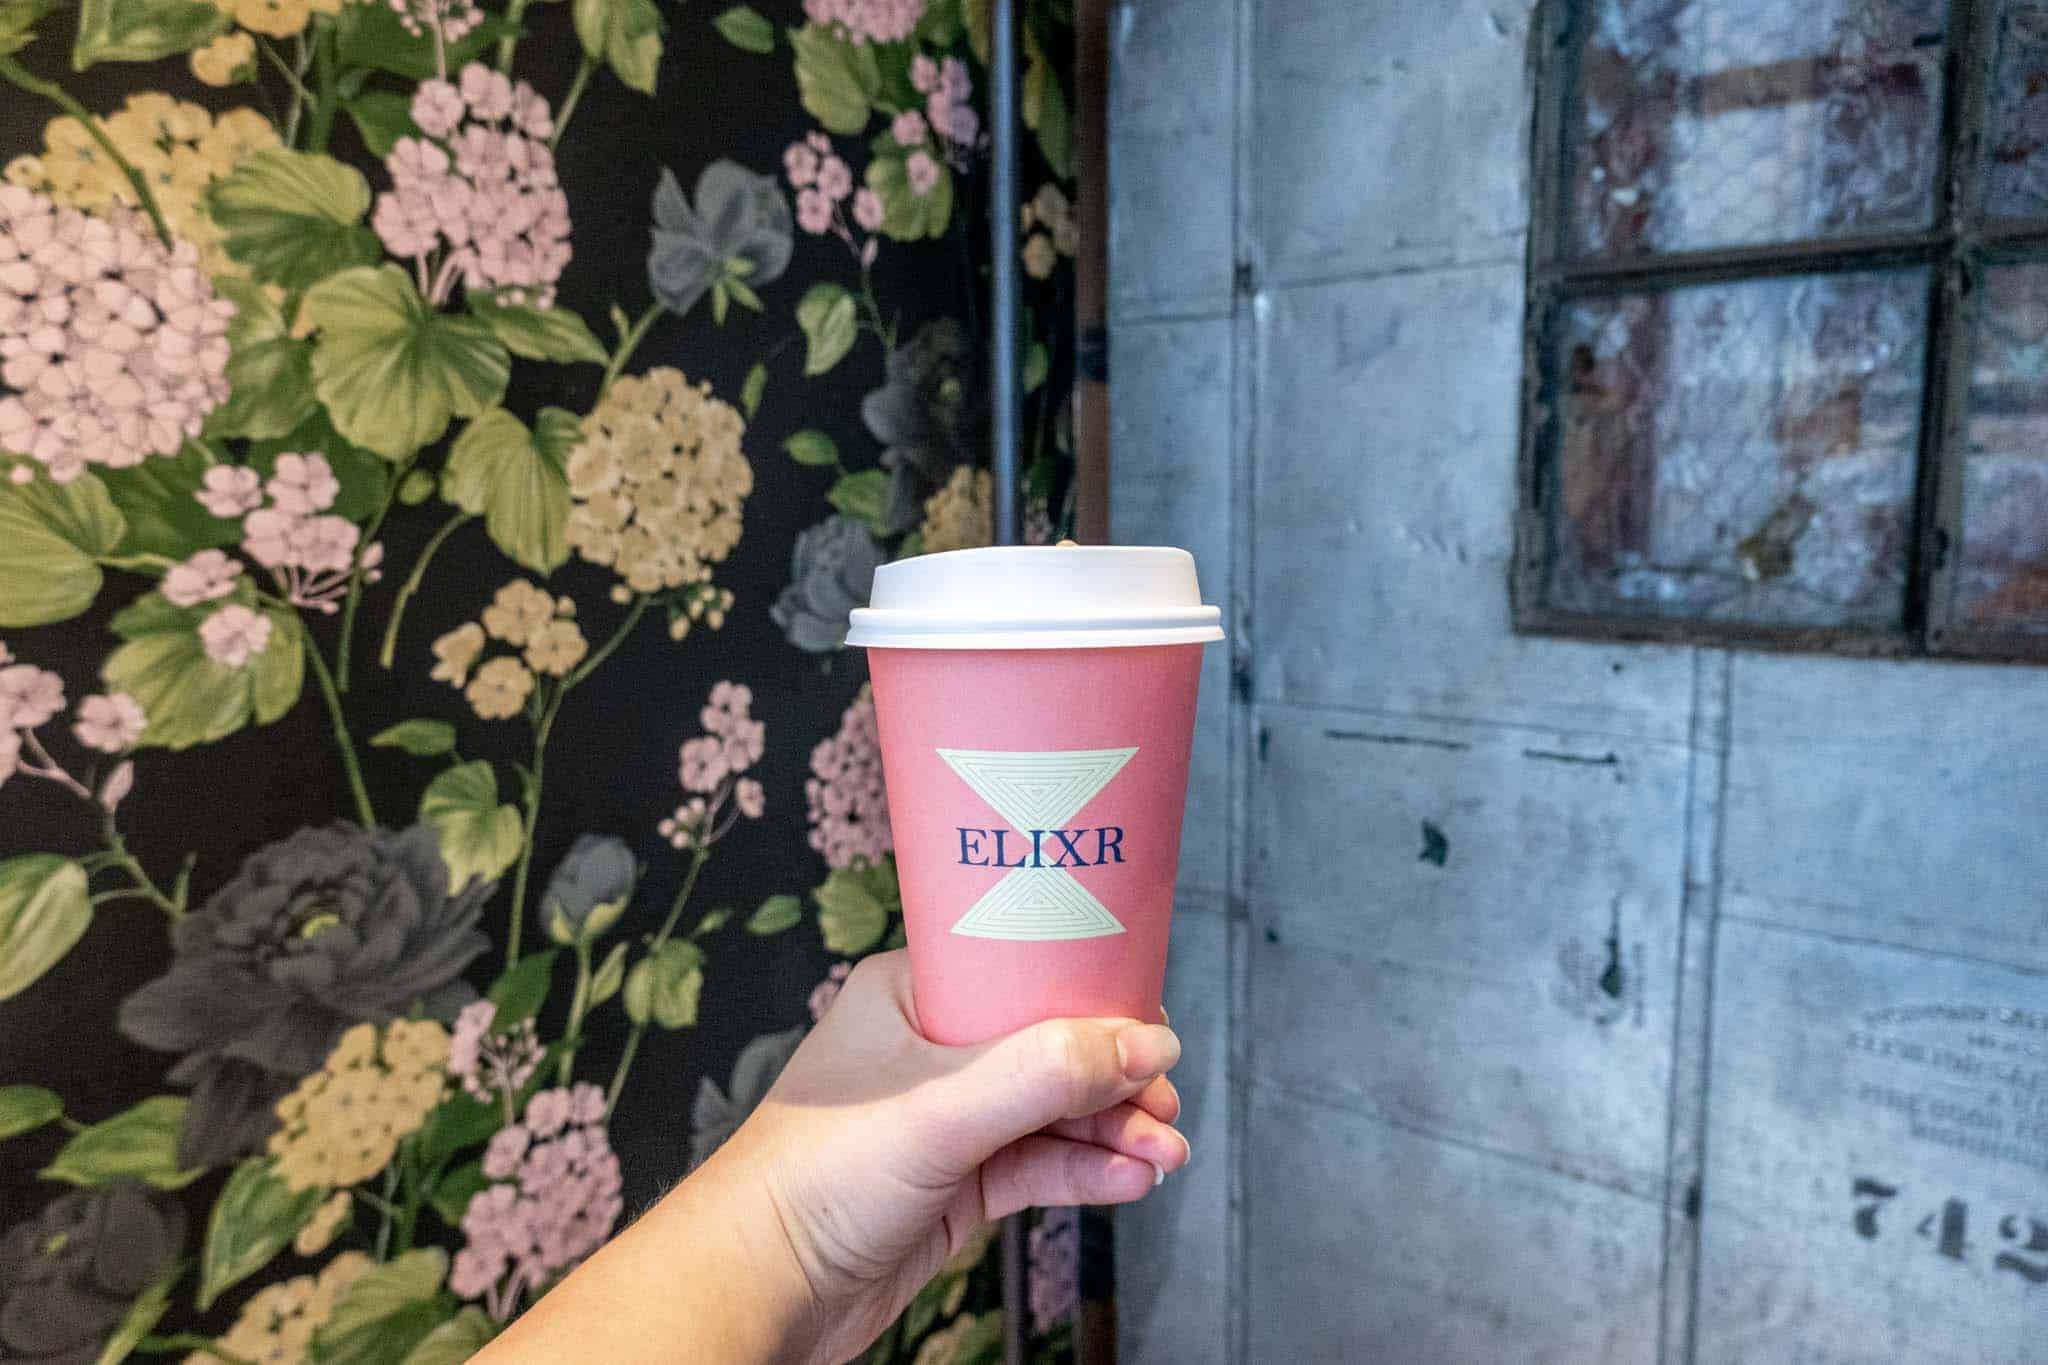 Hand holding a pink coffee cup labeled "Elixr."